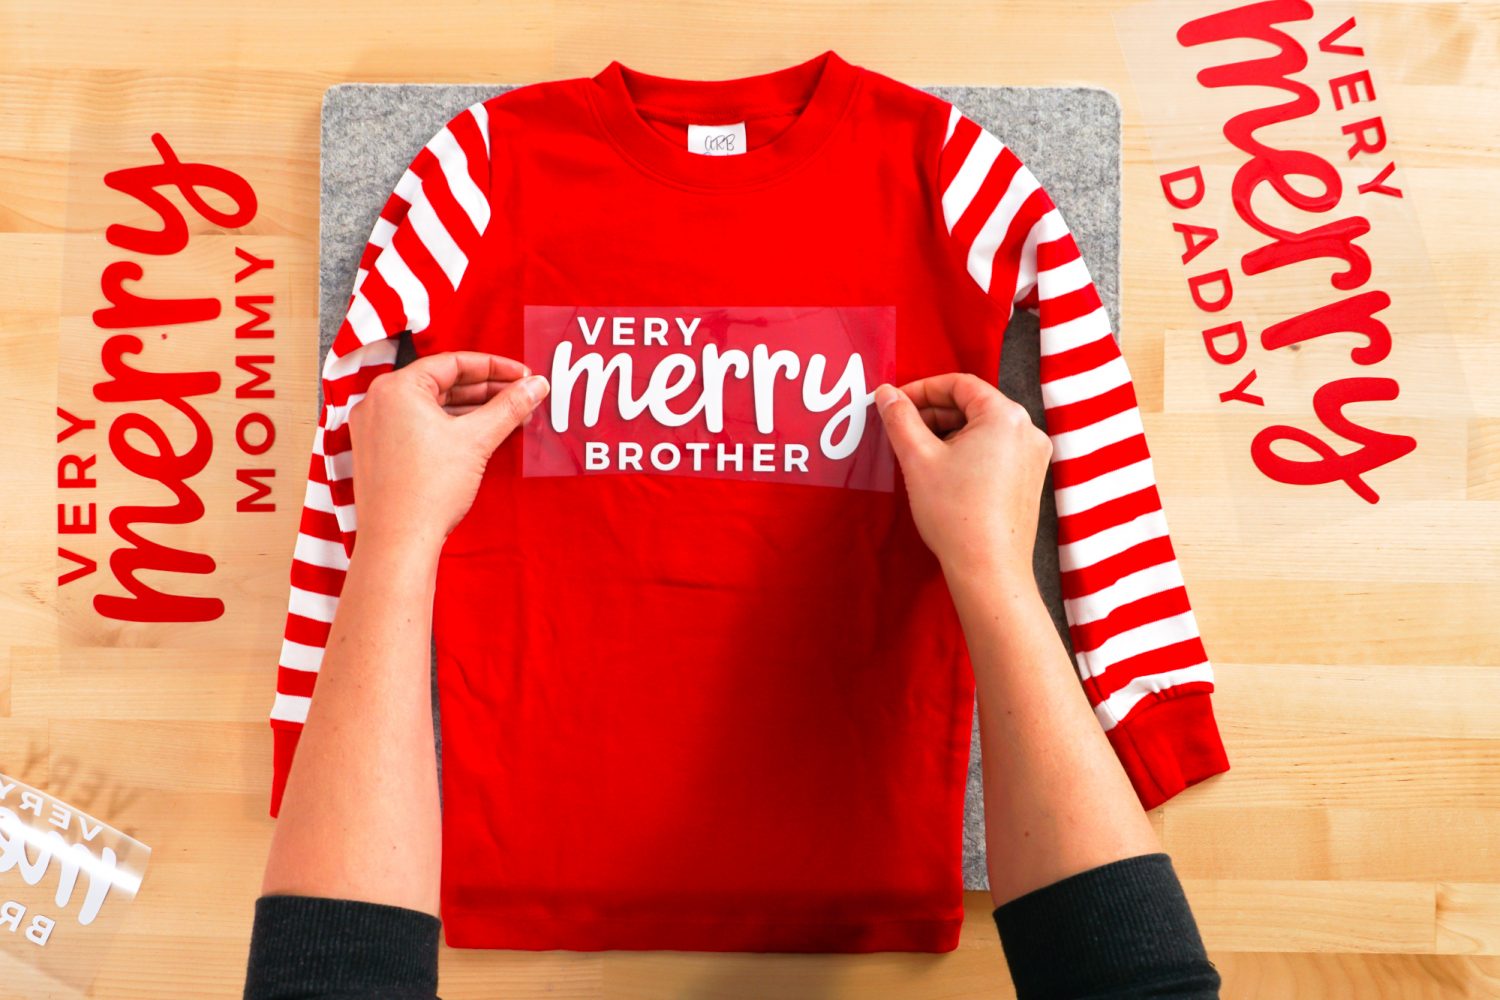 hands placing Very Merry Brother decal on shirt